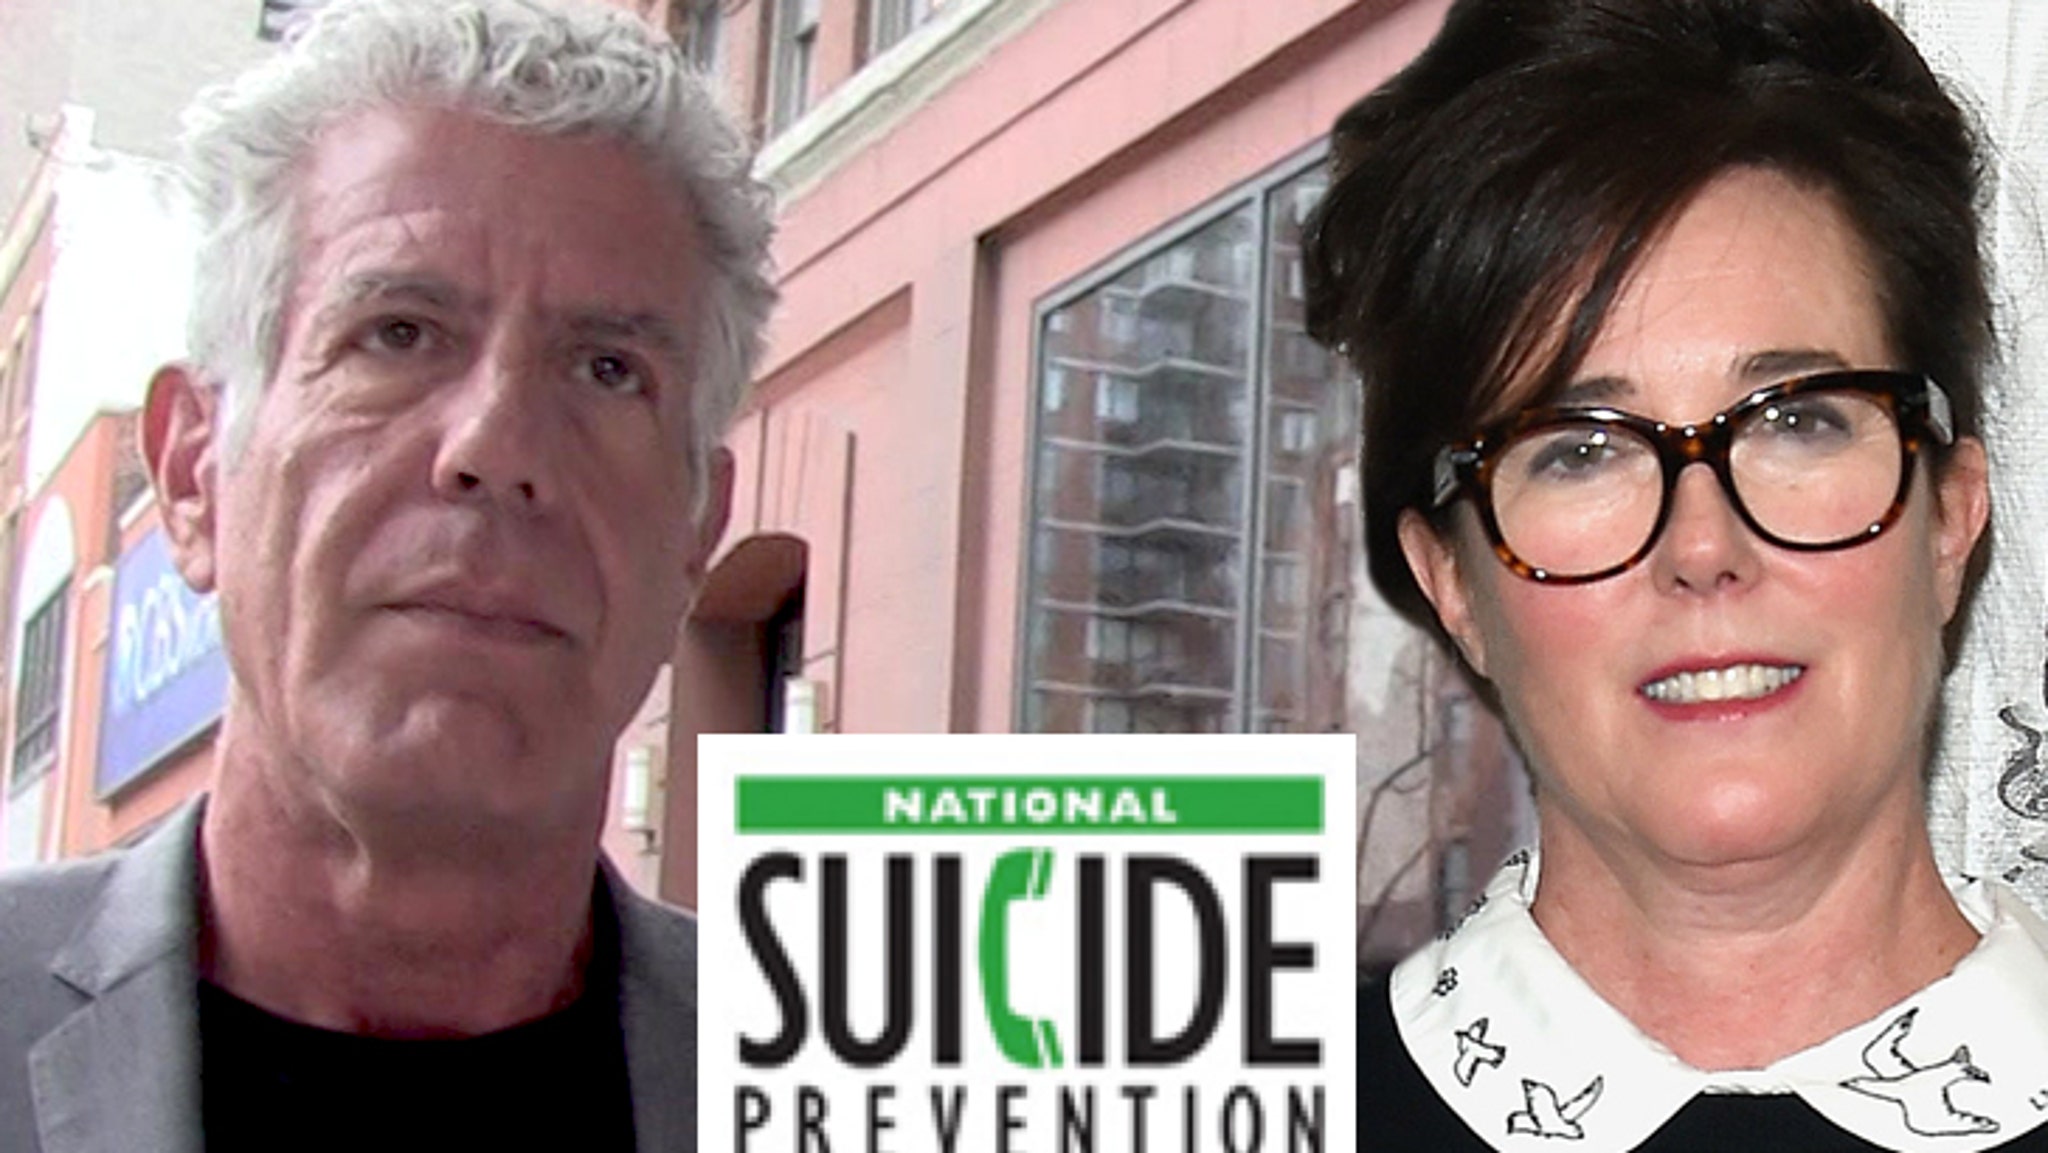 Anthony Bourdain Kate Spade Suicides Spark Increased Calls To Suicide